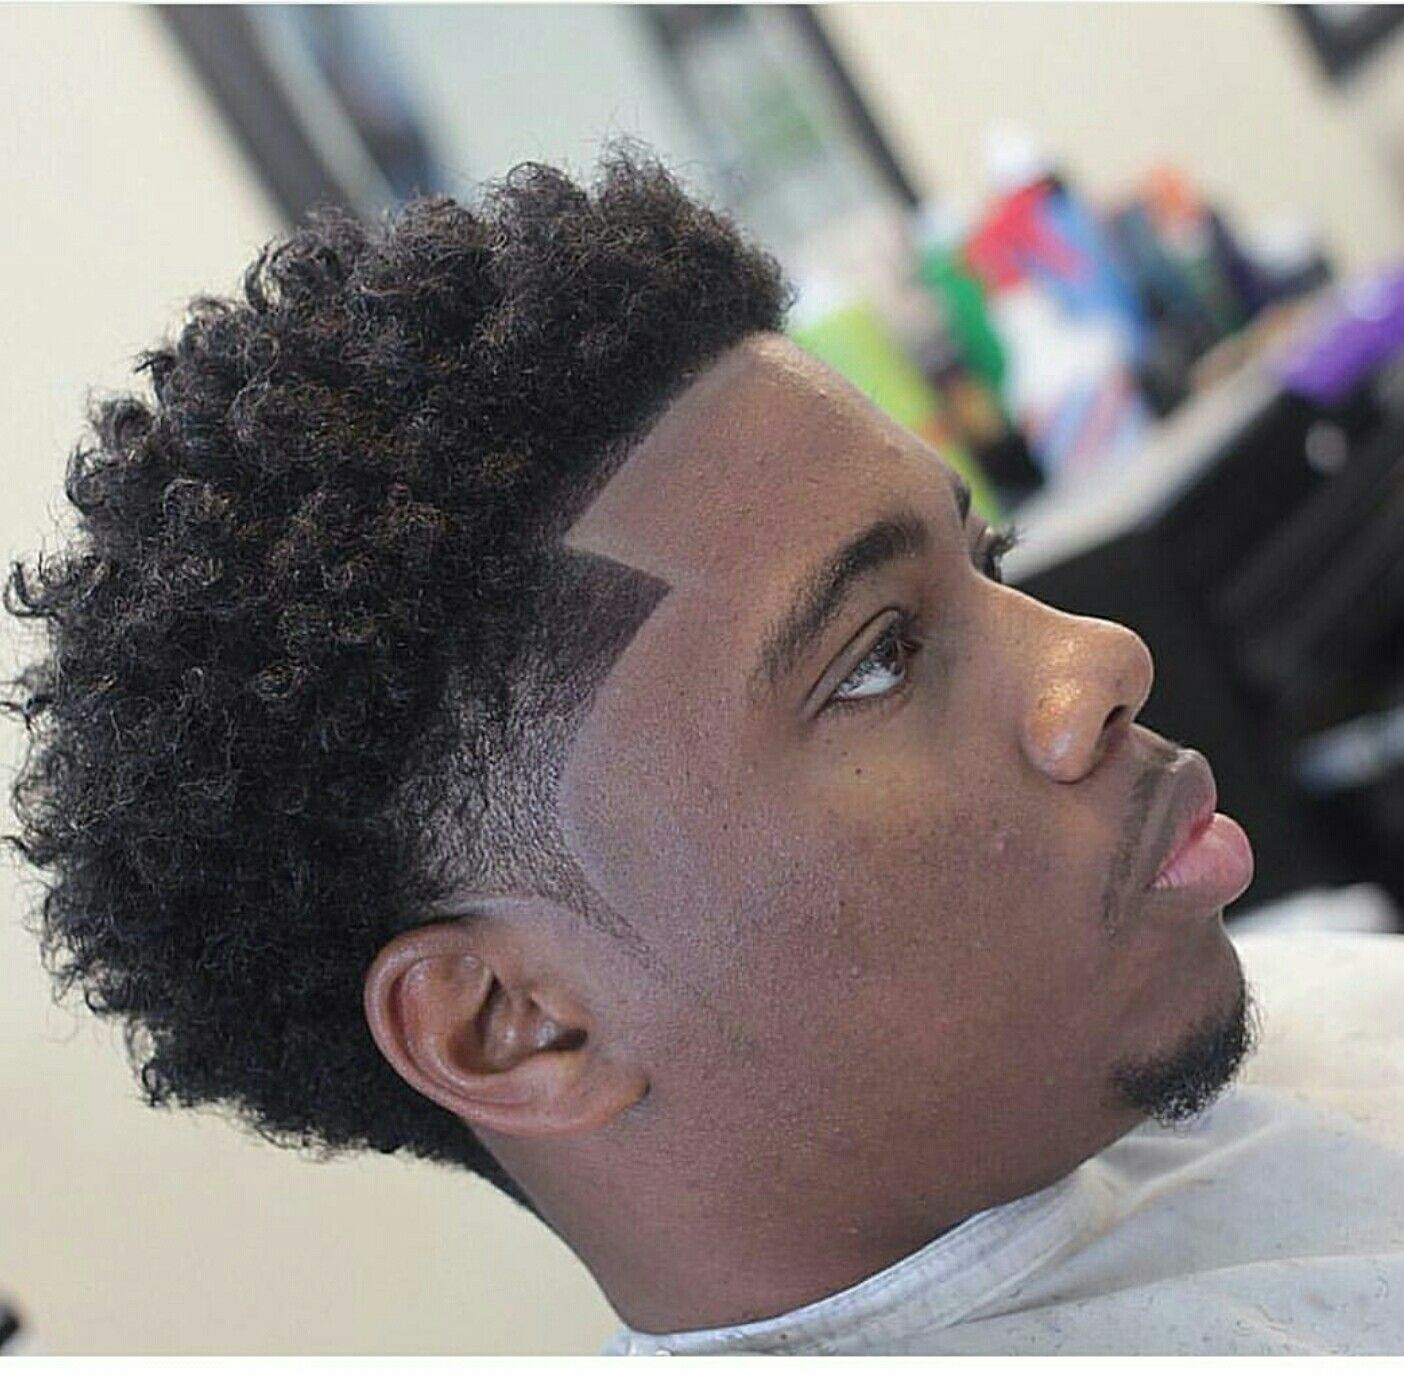 Pin By Vernon Warren Jr. On Hair Goals &amp;amp; Products | Hair And Beard dedans Taper Cheveux Lisses